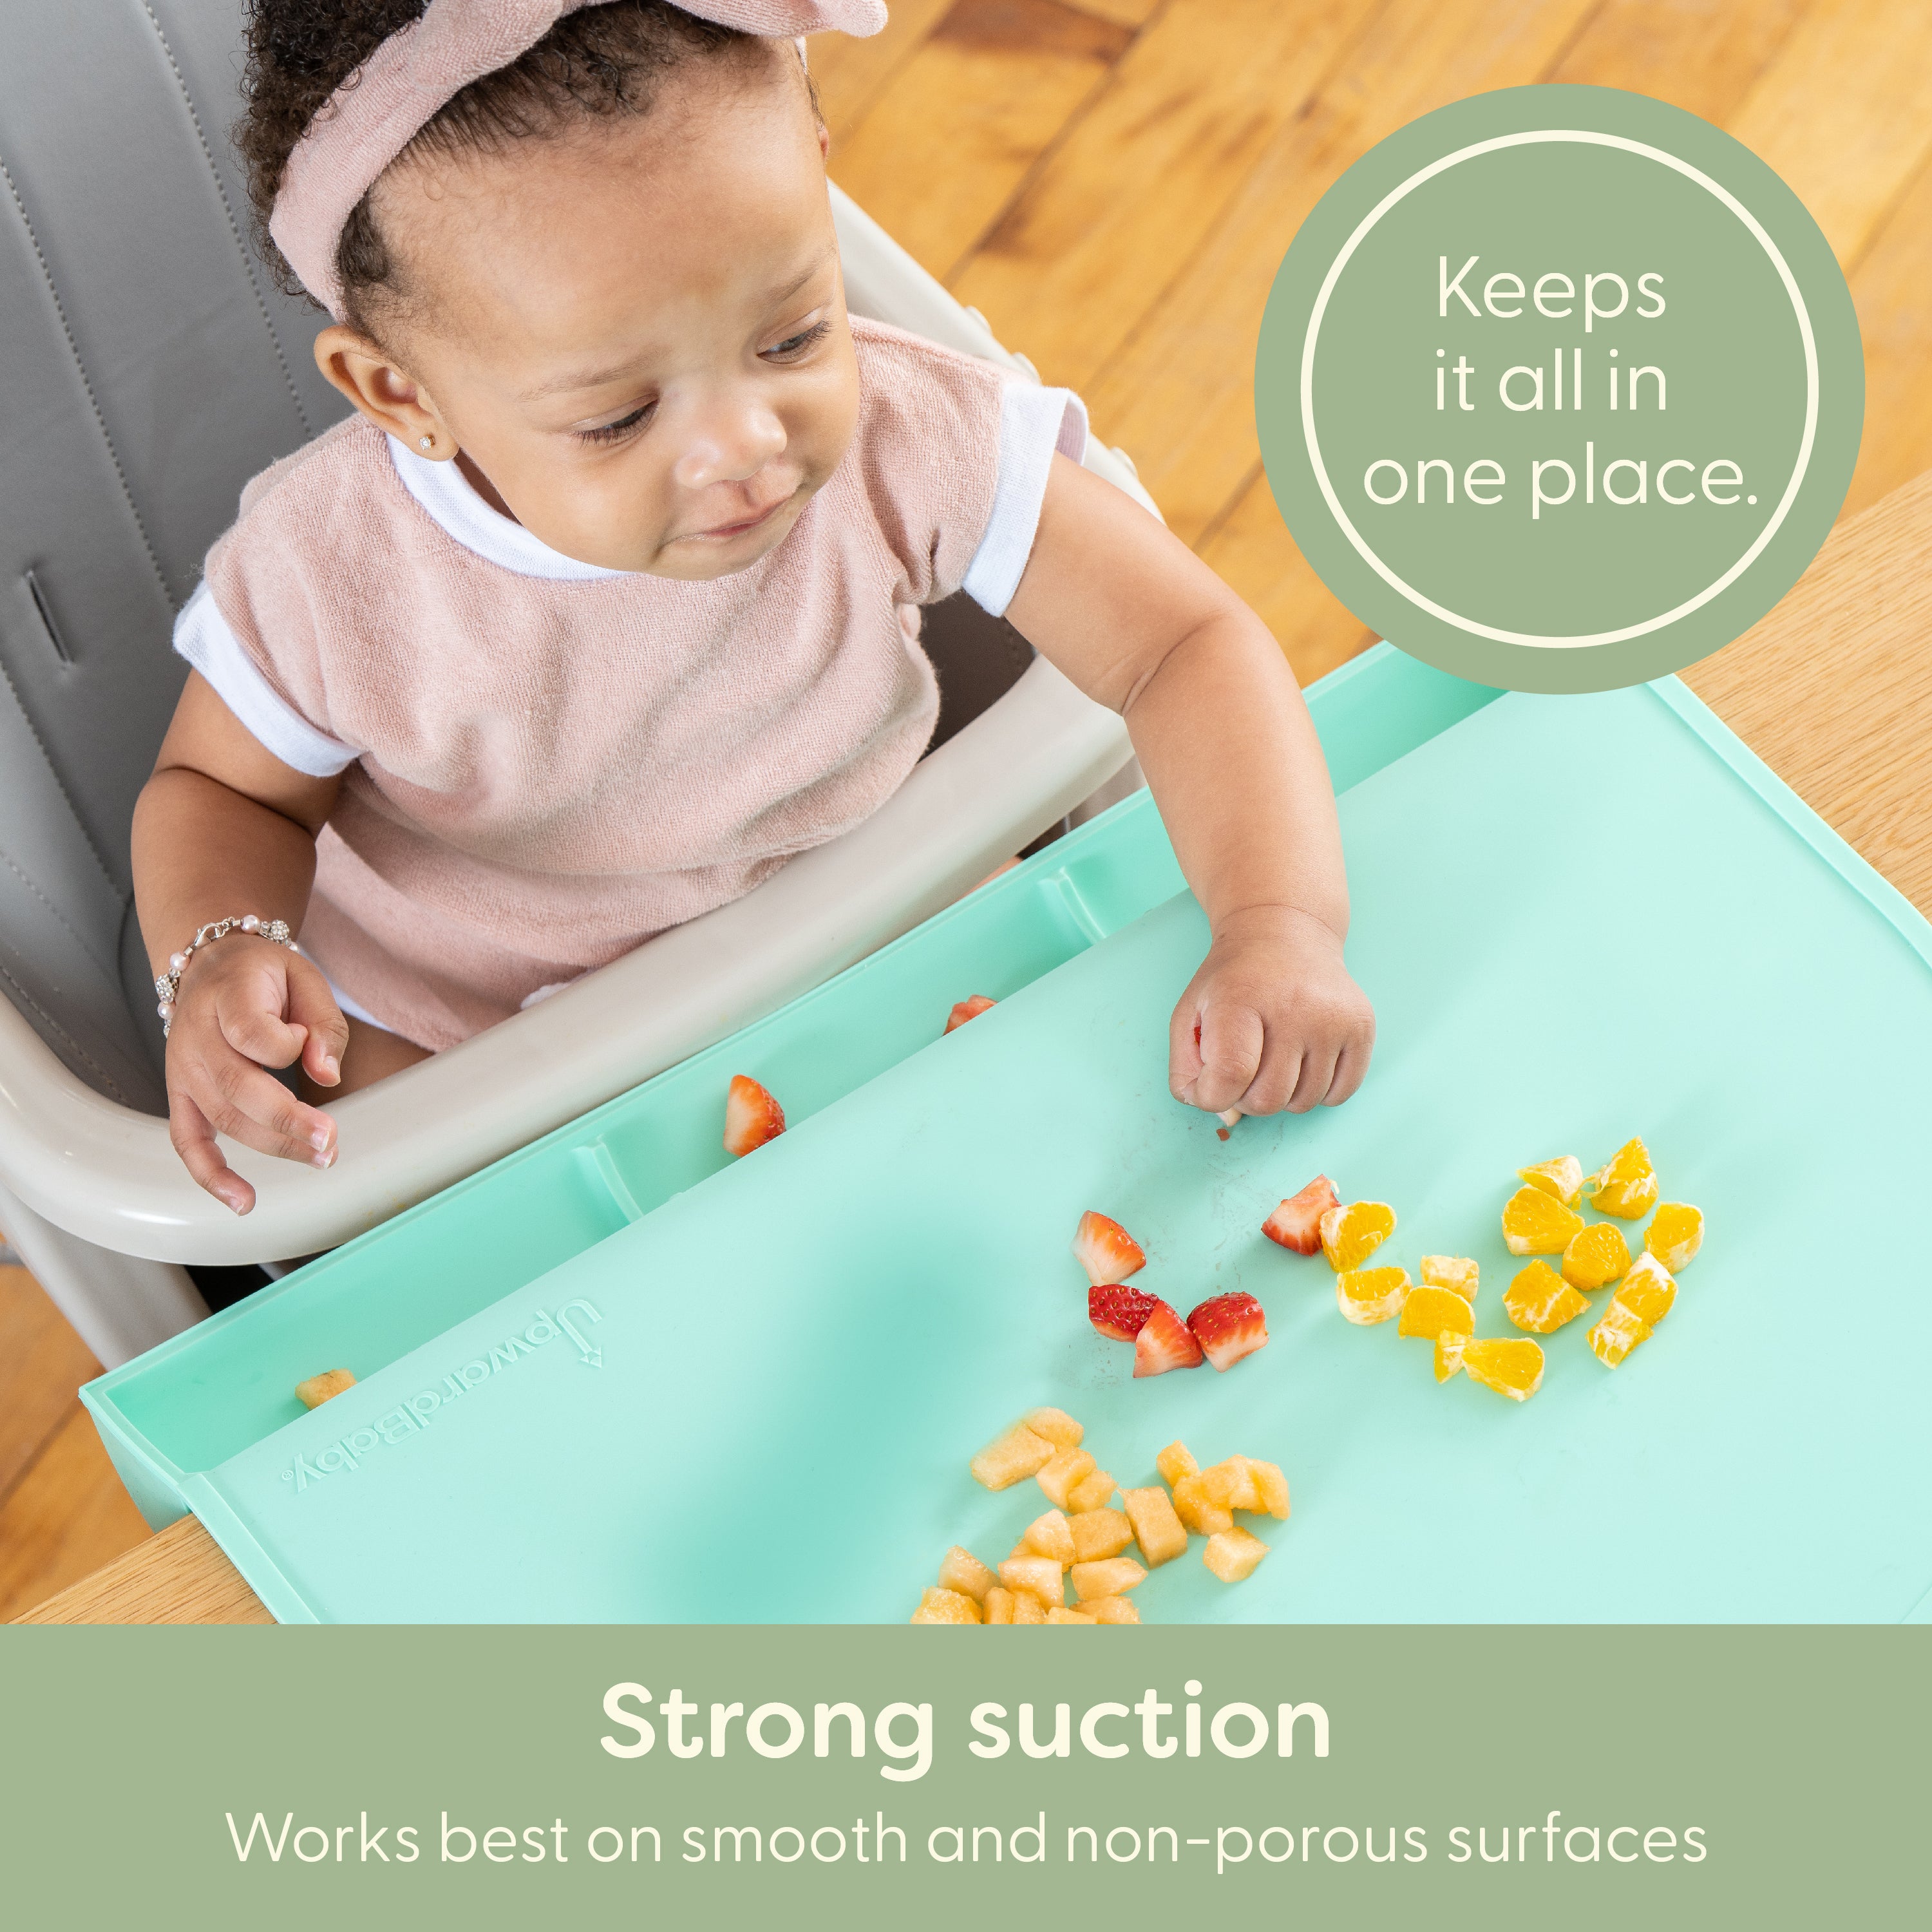 Food Catching Suction Placemat - Mint